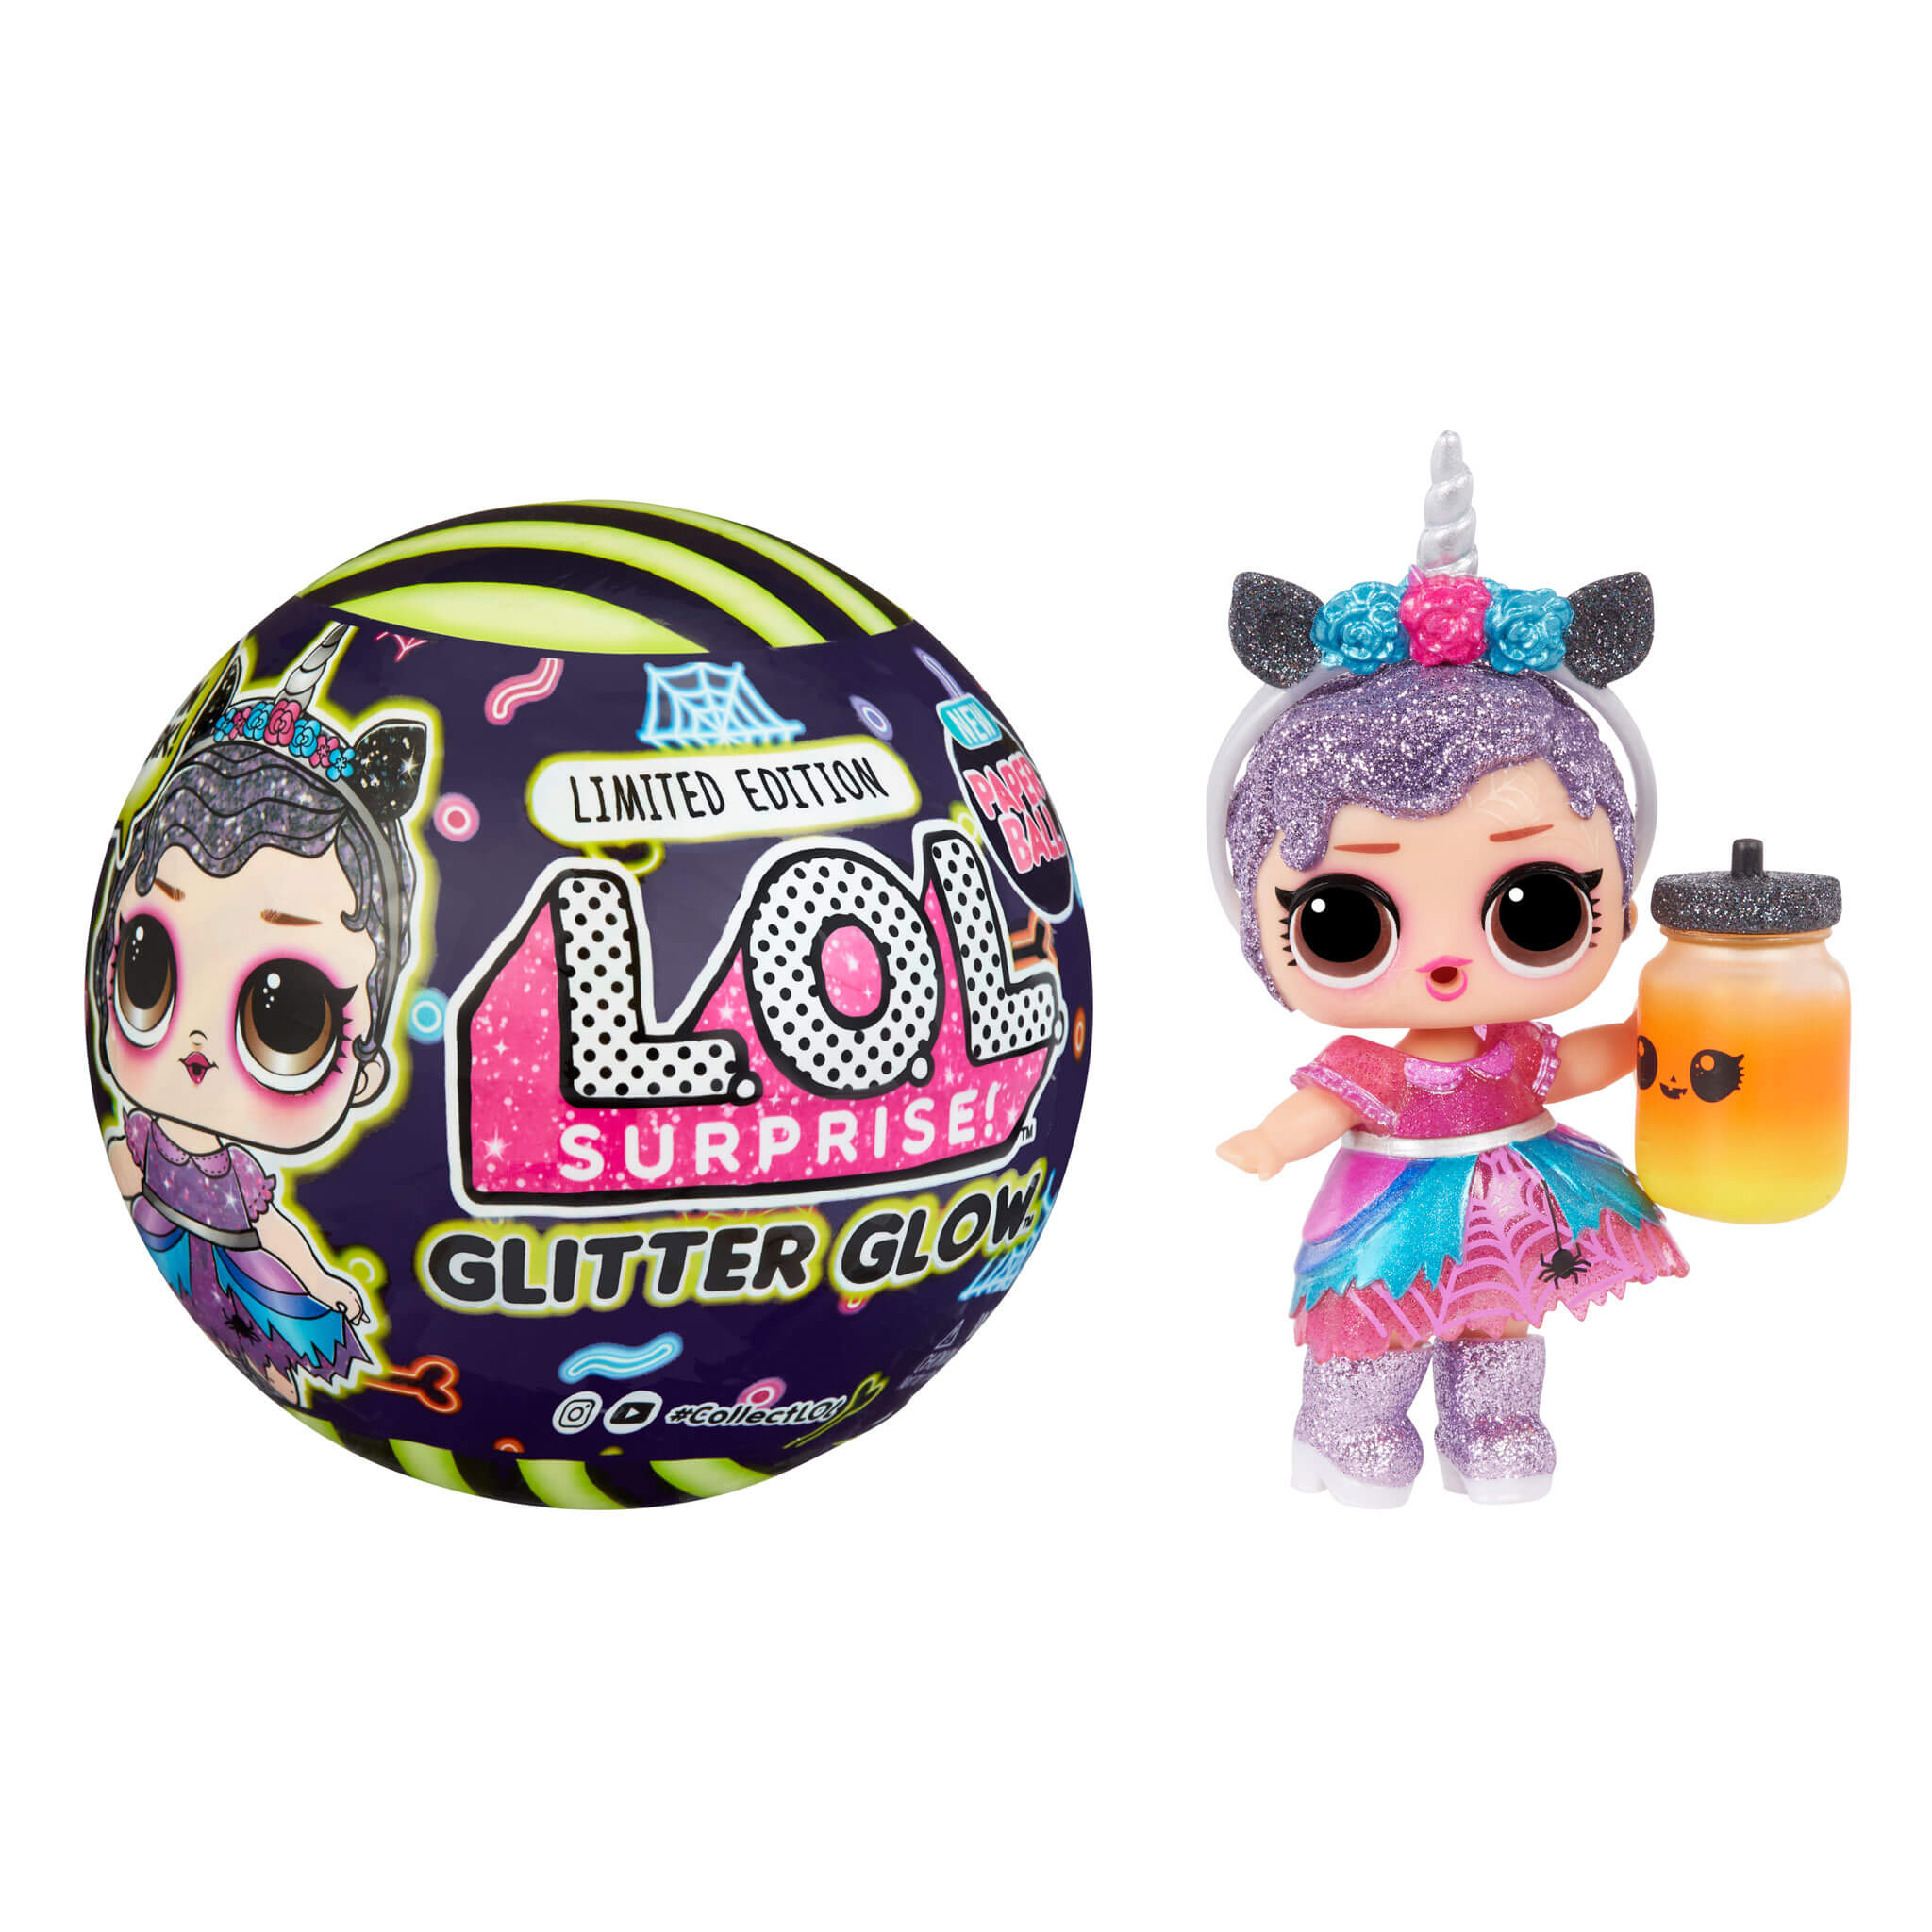 Email Omgaan Werkloos LOL Surprise Glitter Glow Doll Enchanted B.B. with 7 Surprises - L.O.L.  Surprise! Official Store